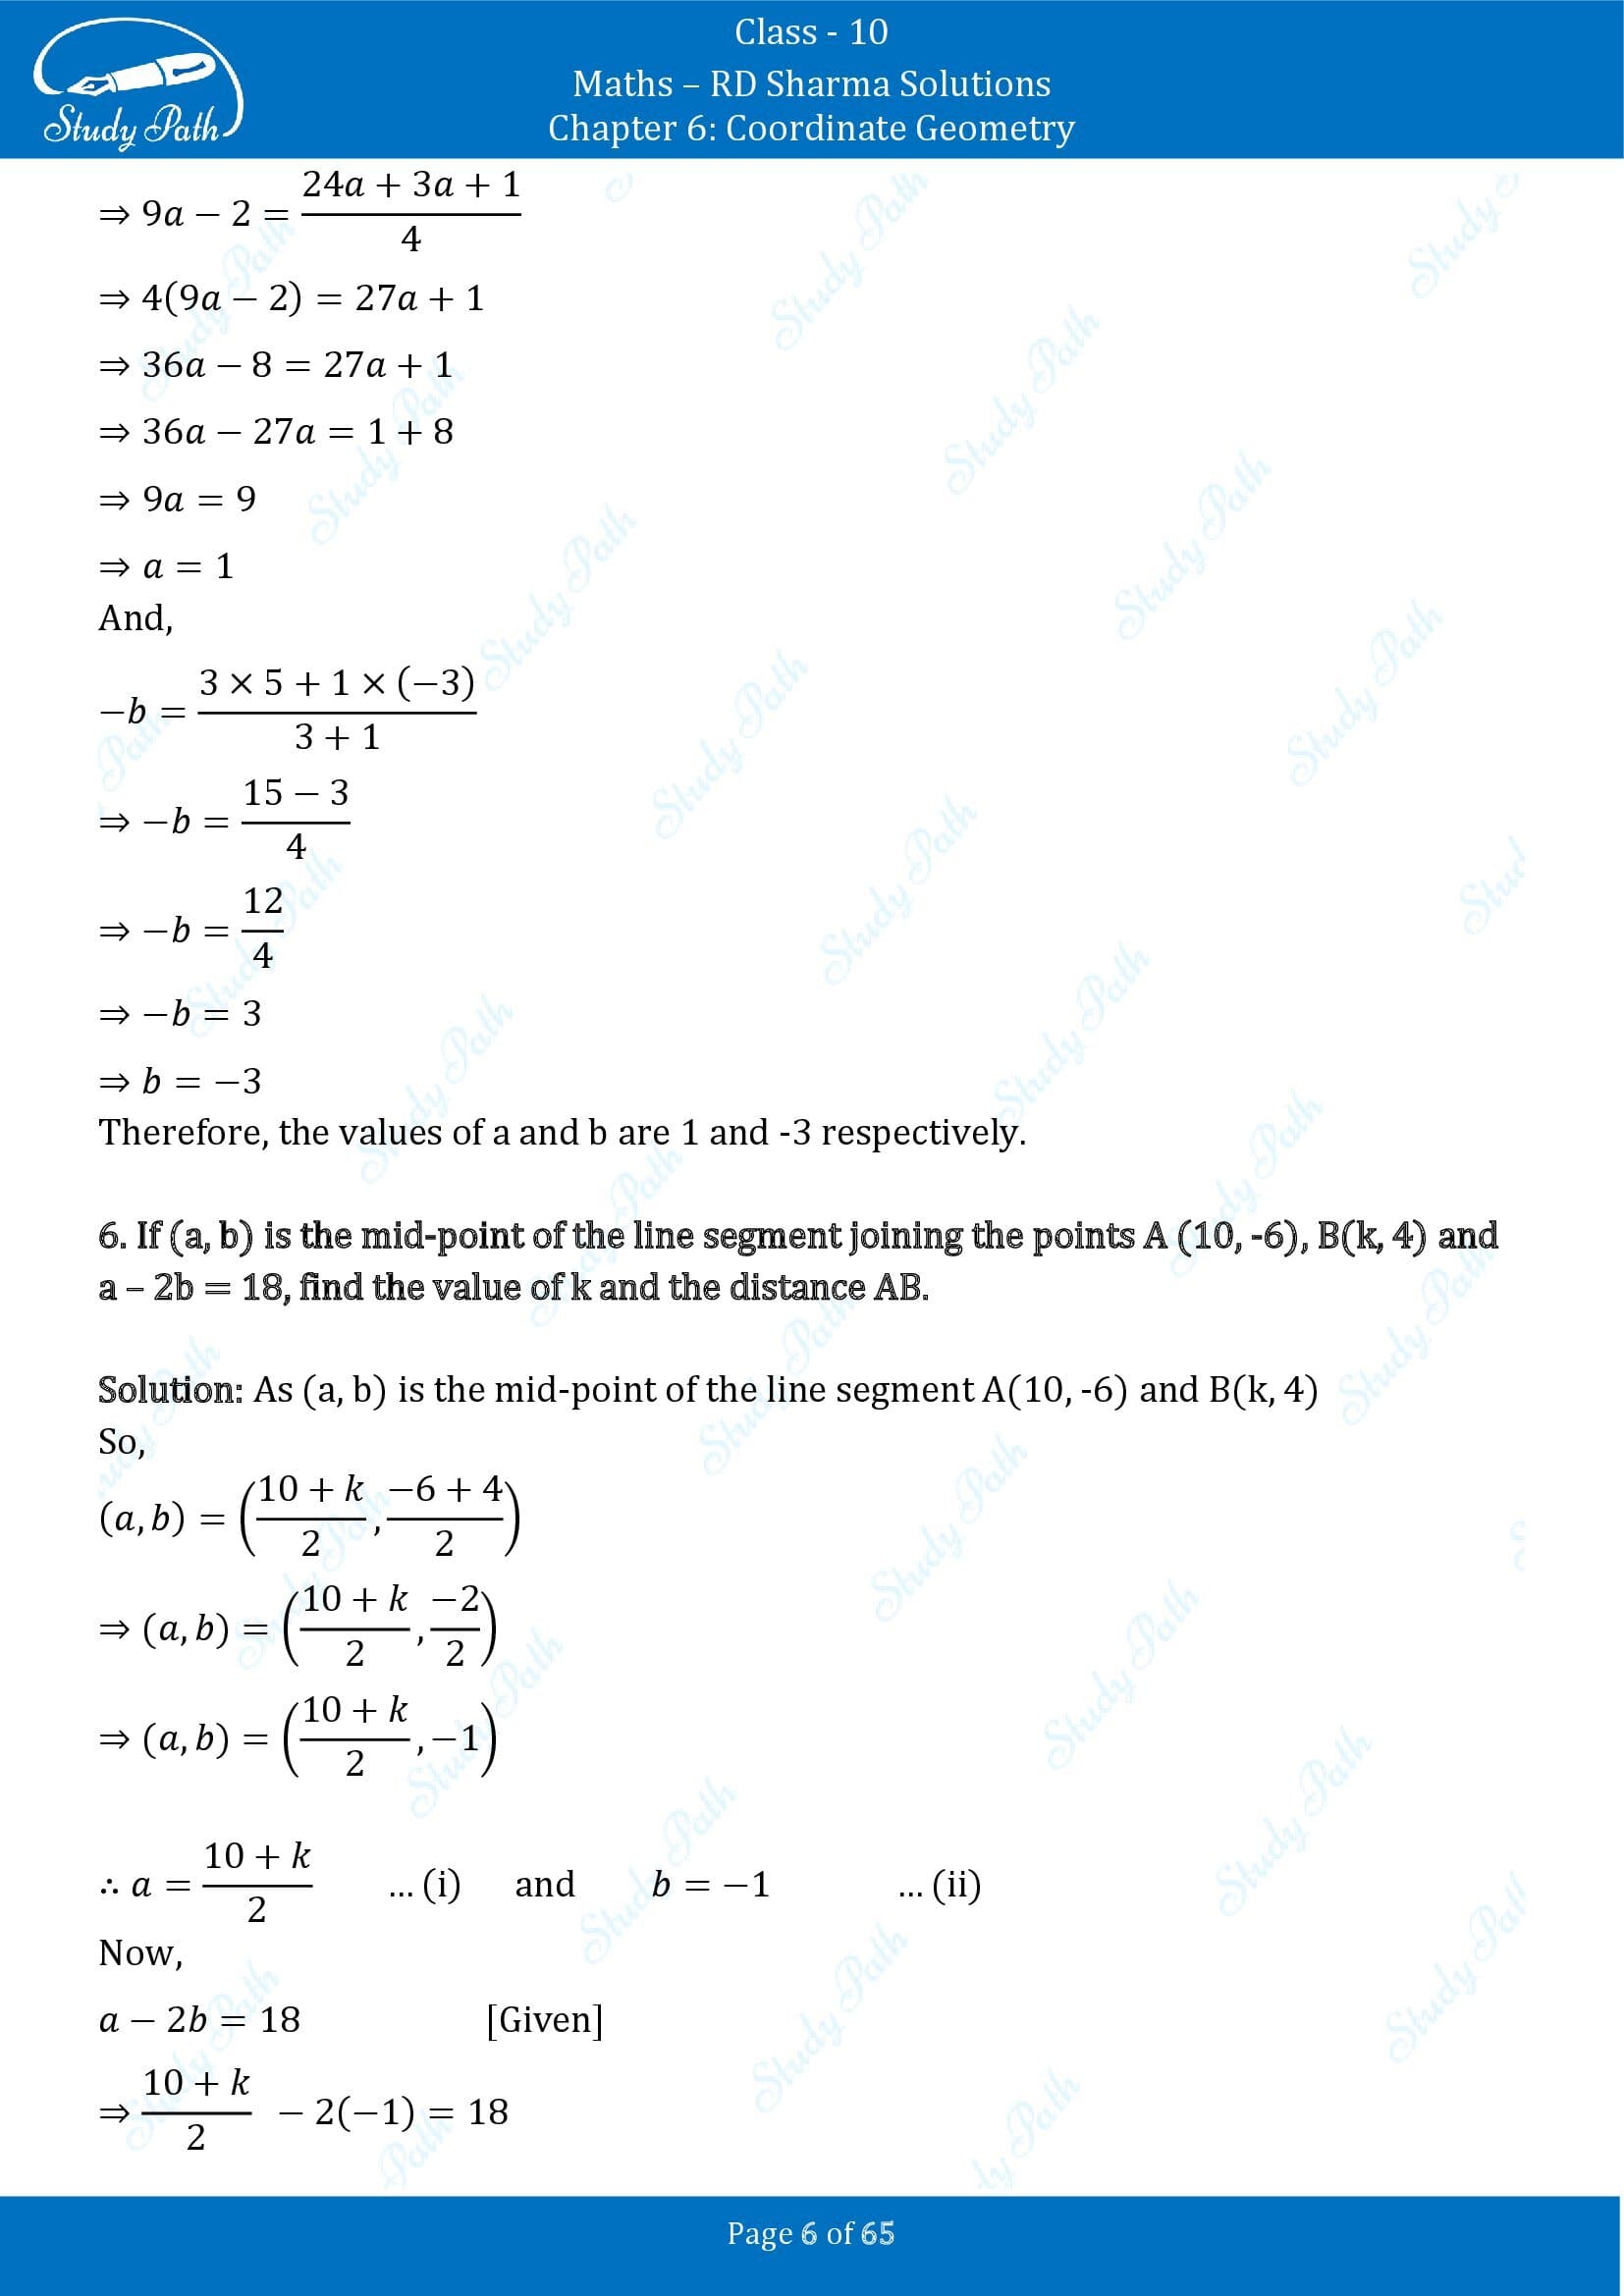 RD Sharma Solutions Class 10 Chapter 6 Coordinate Geometry Exercise 6.3 00006